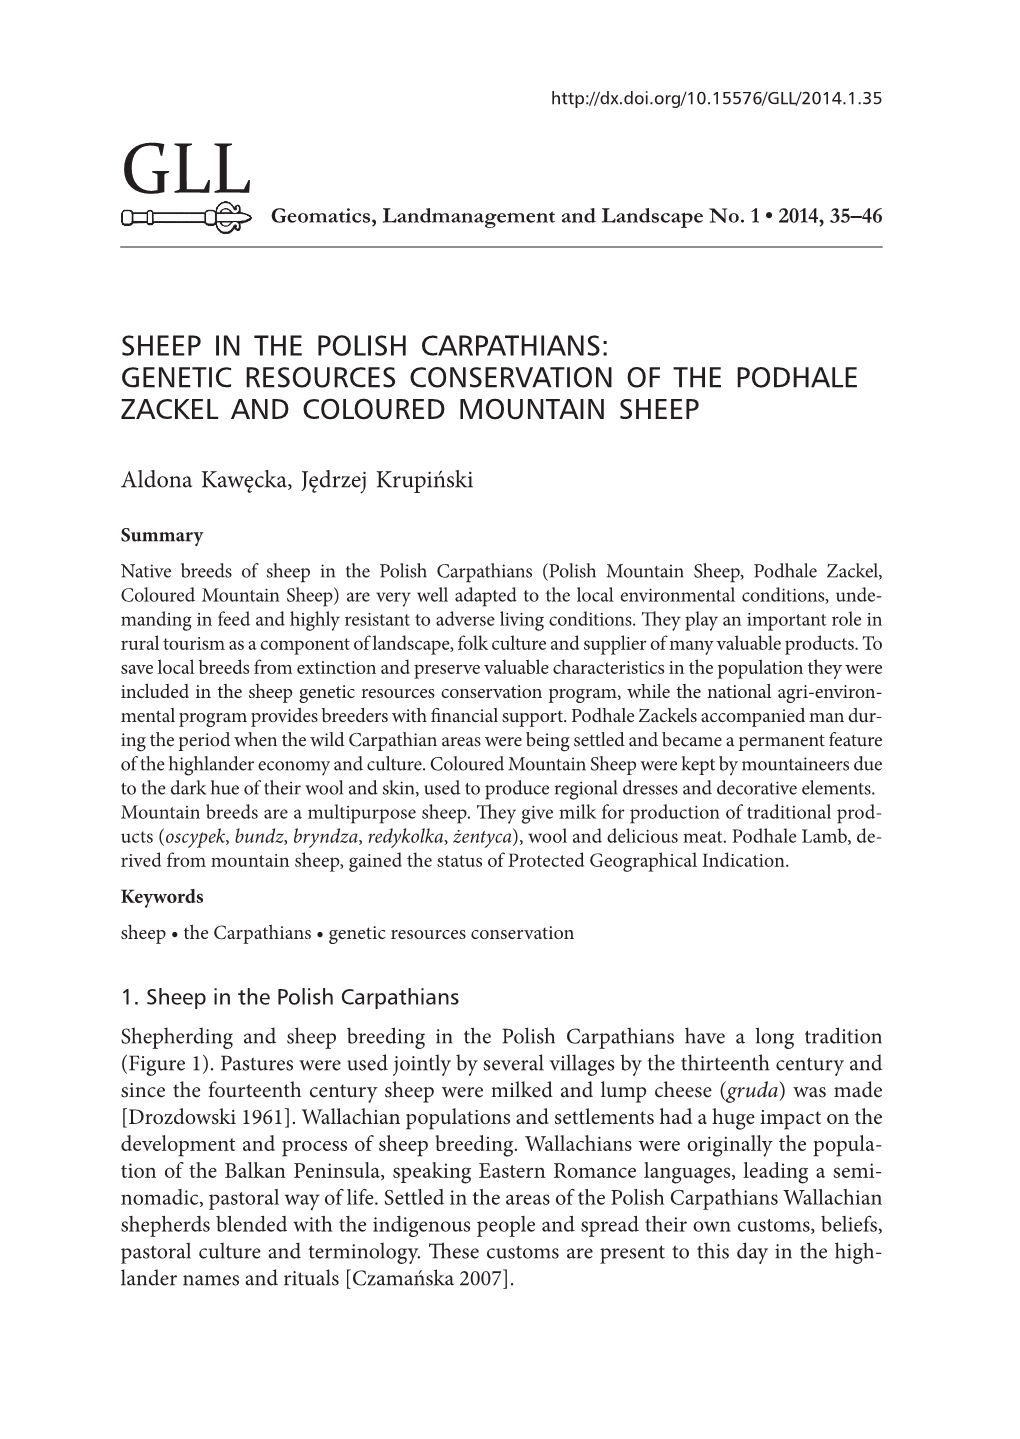 Genetic Resources Conservation of the Podhale Zackel and Coloured Mountain Sheep